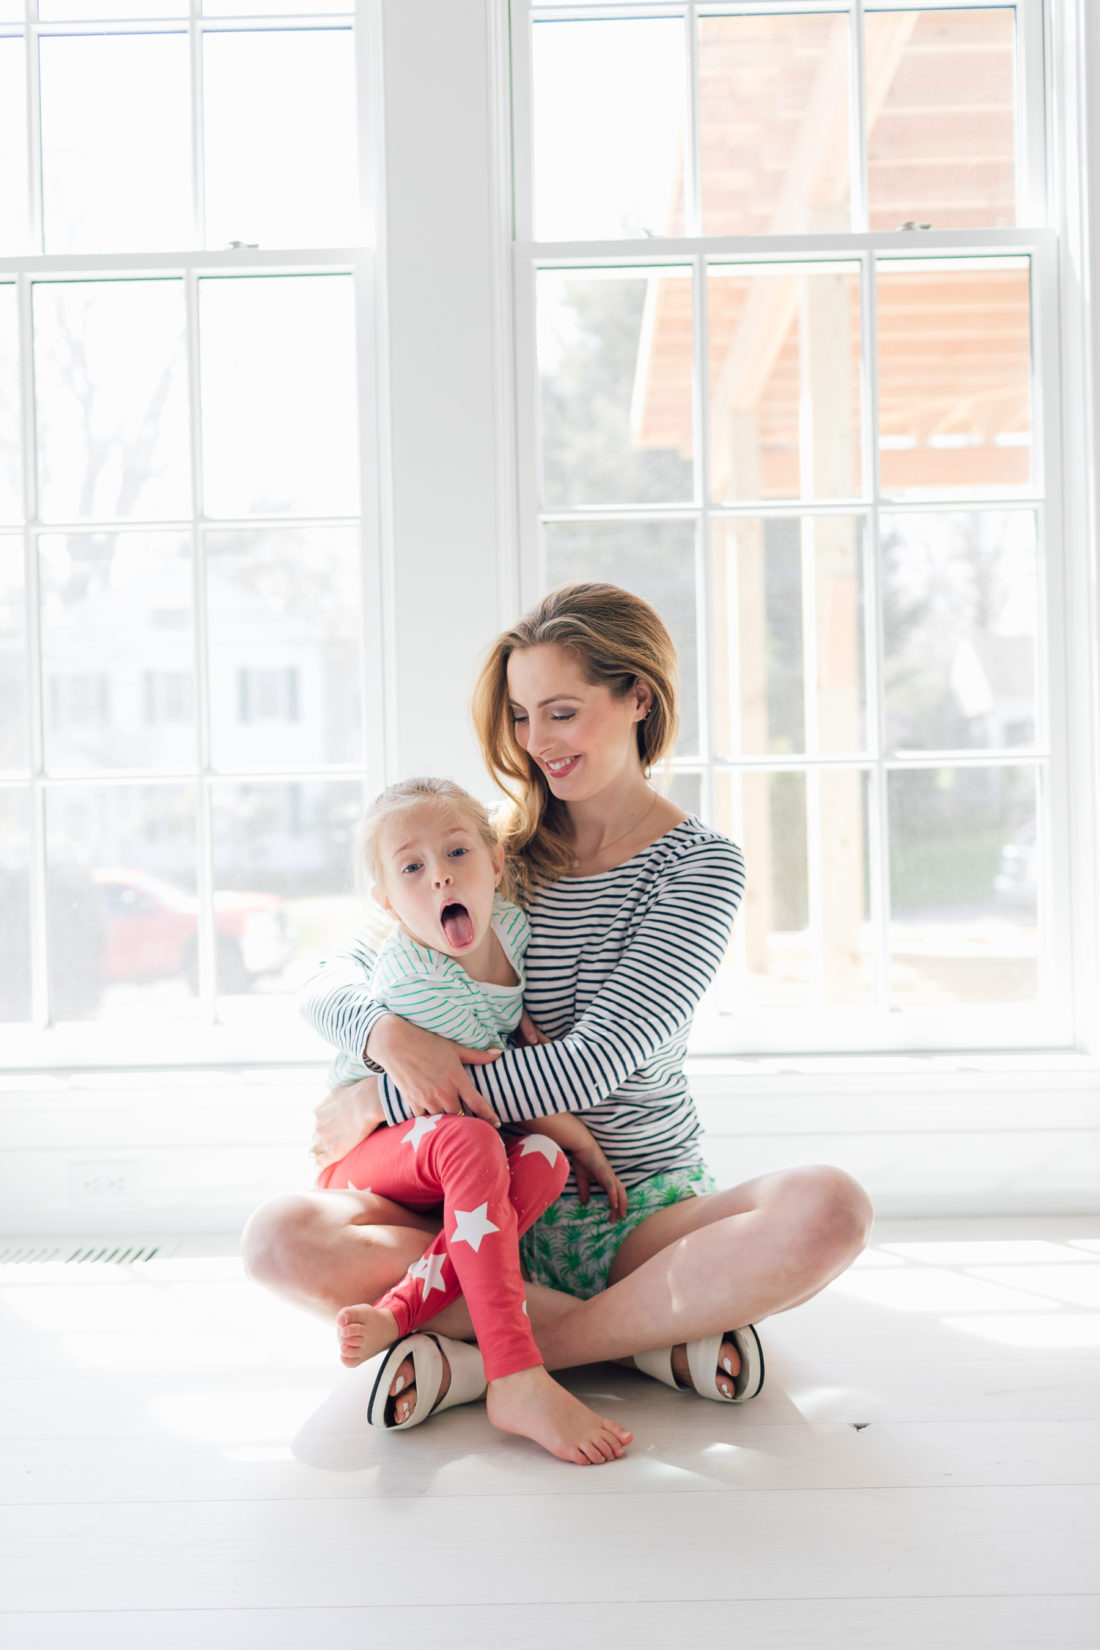 Eva Amurri Martino of Happily Eva After cradles her daughter Marlowe on the floor of their new home in Connecticut